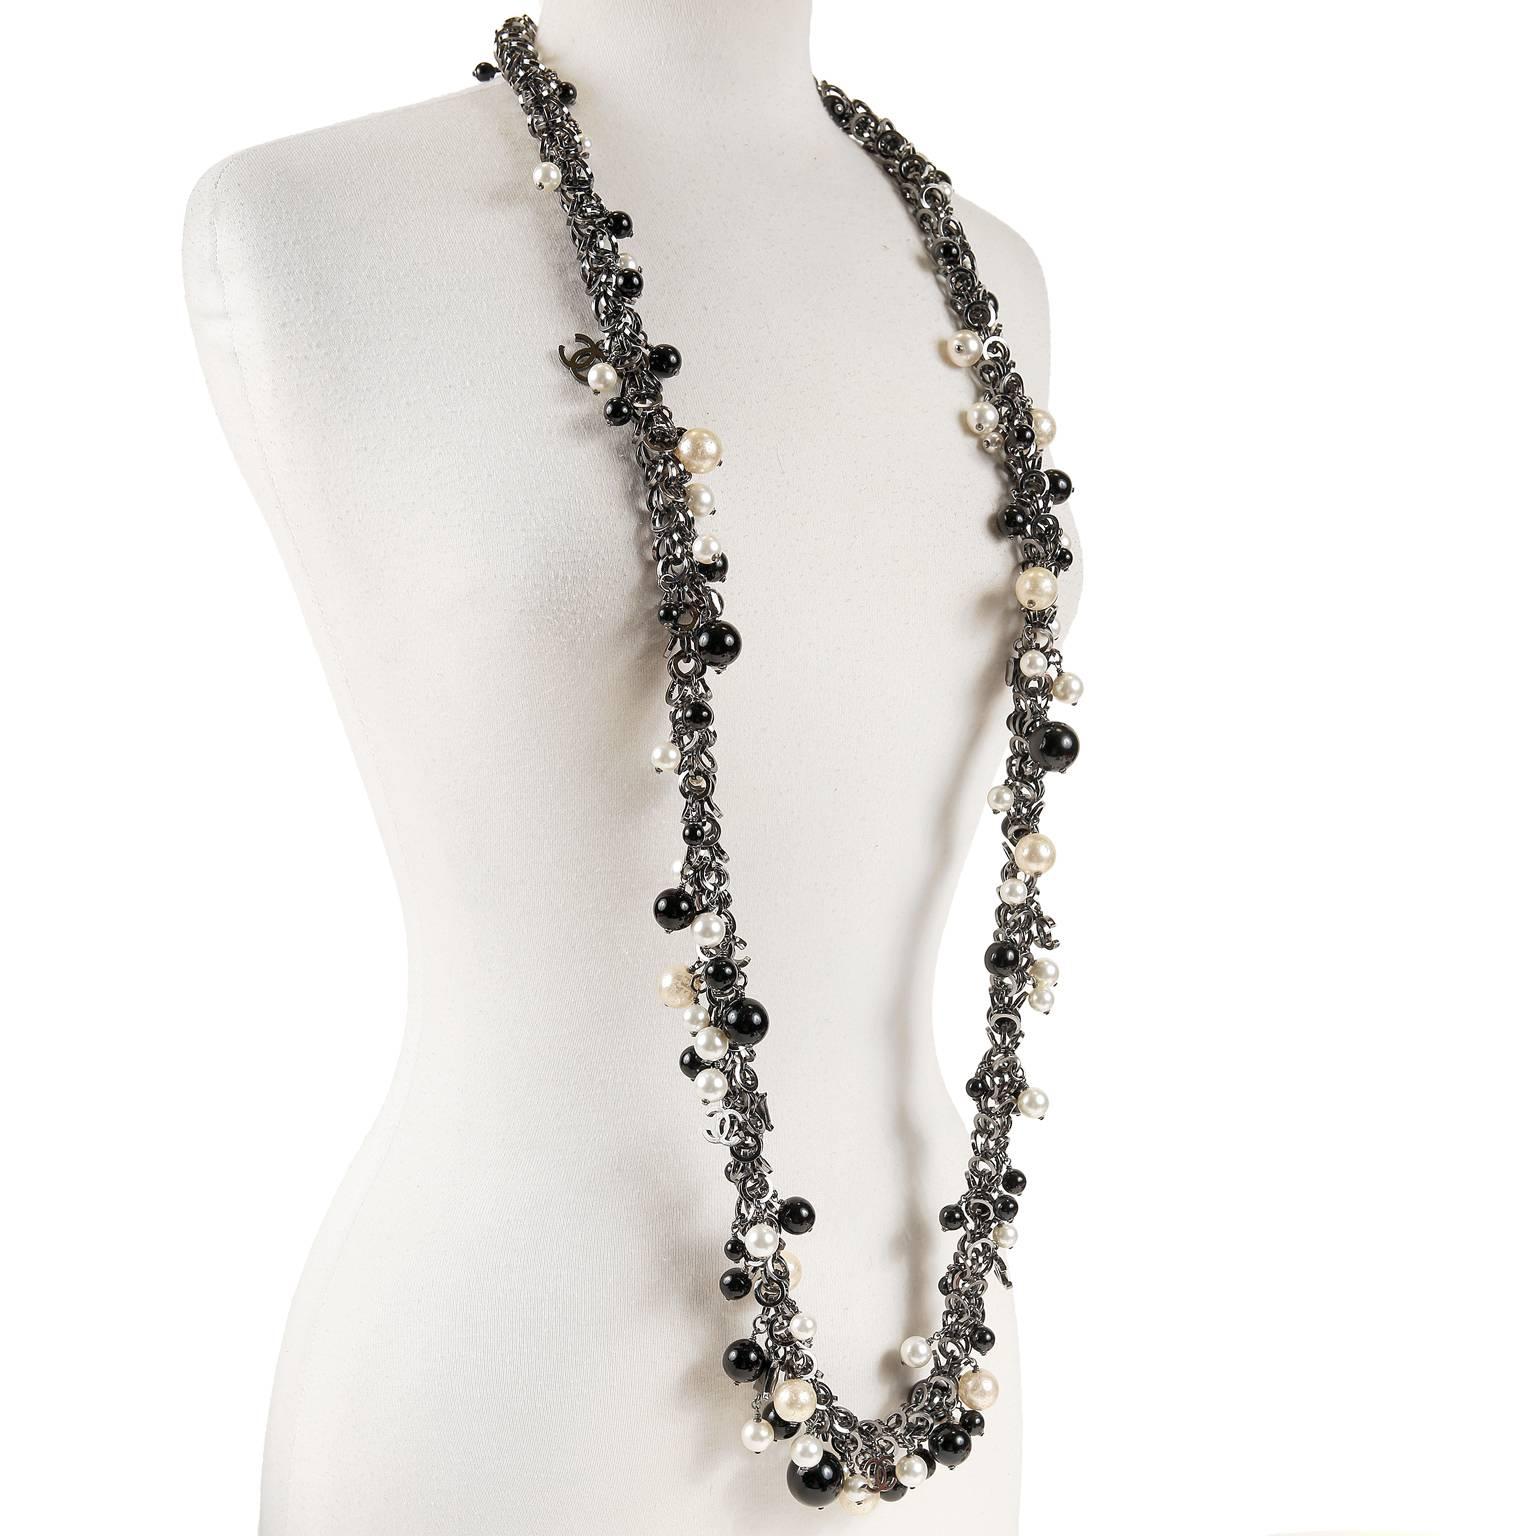 Chanel Black and White Pearl Necklace In Excellent Condition For Sale In Malibu, CA